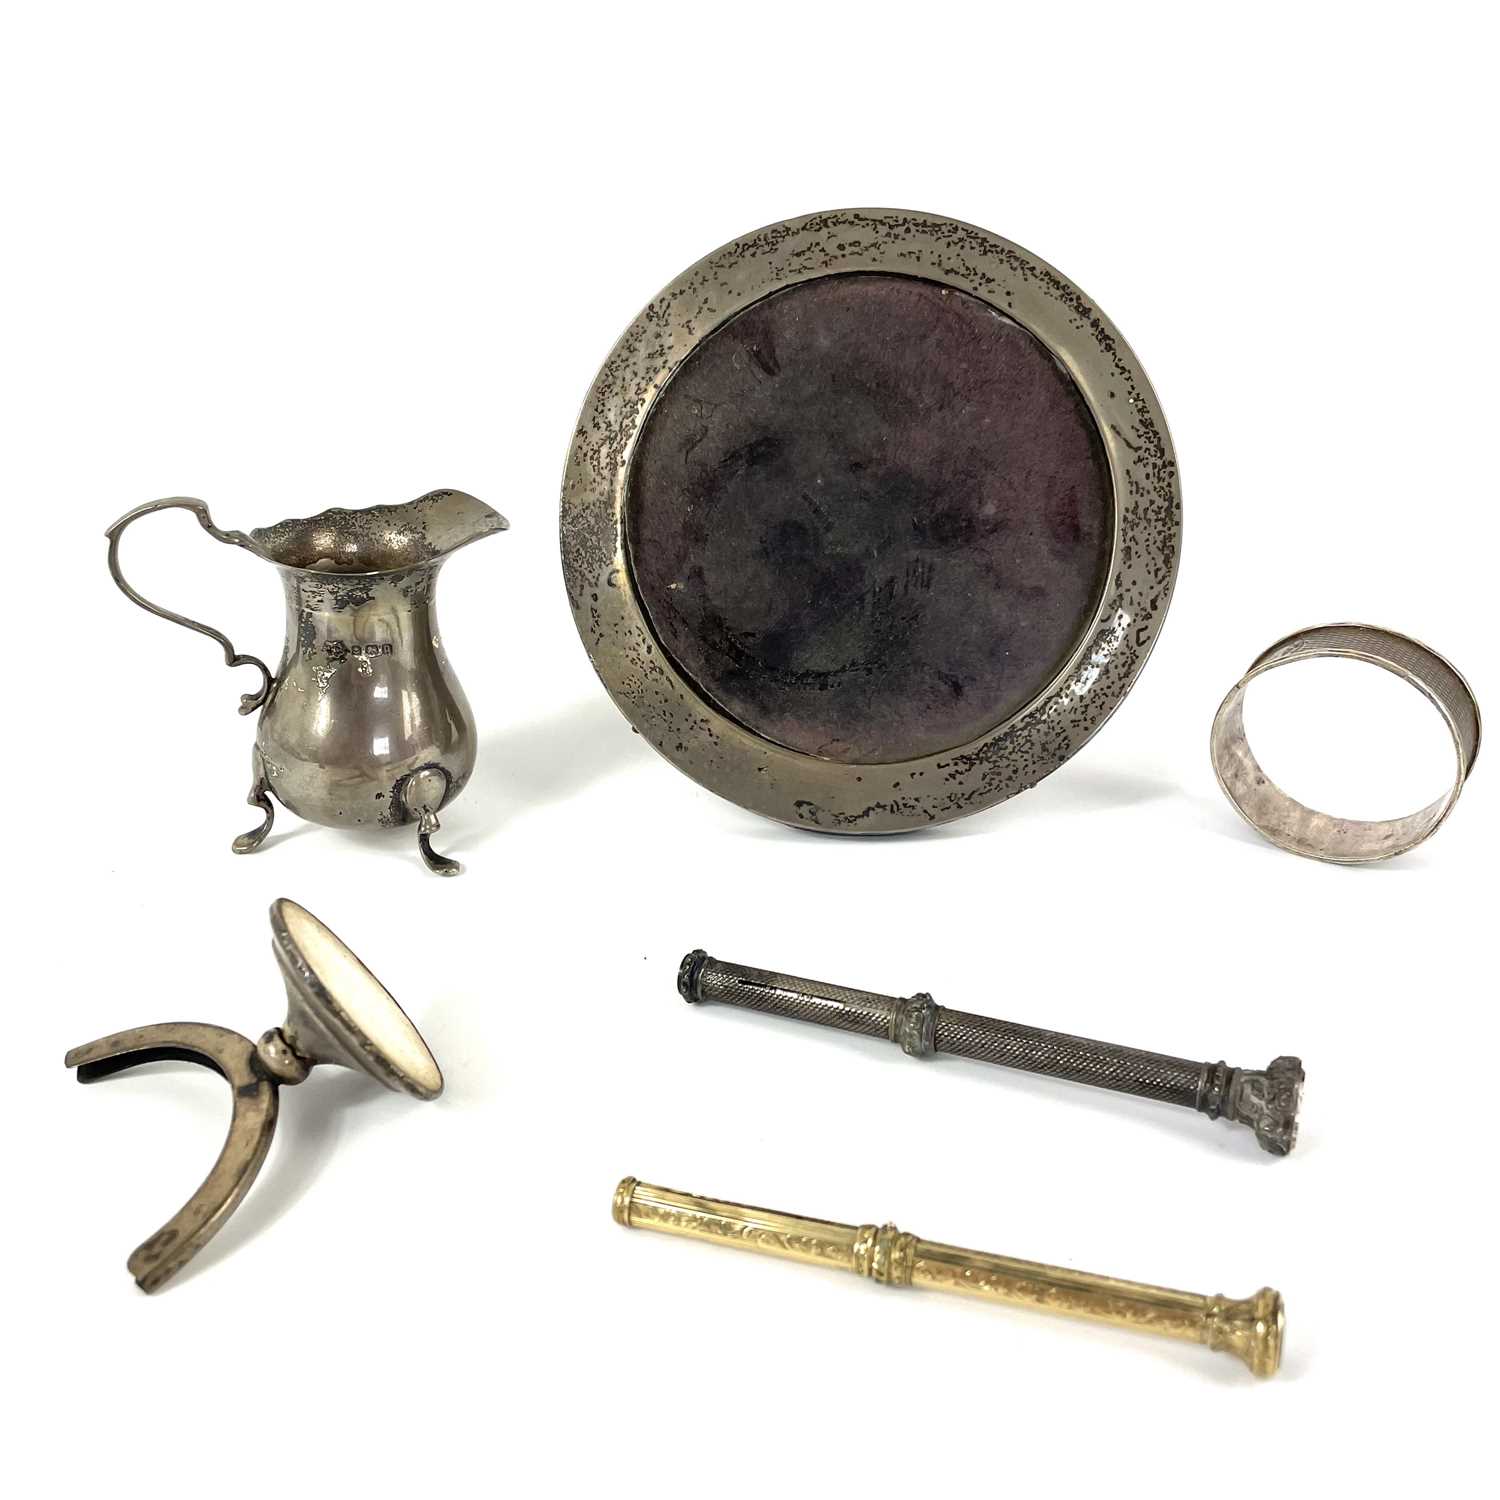 A selection of silver items including a 19th century propelling pencil.